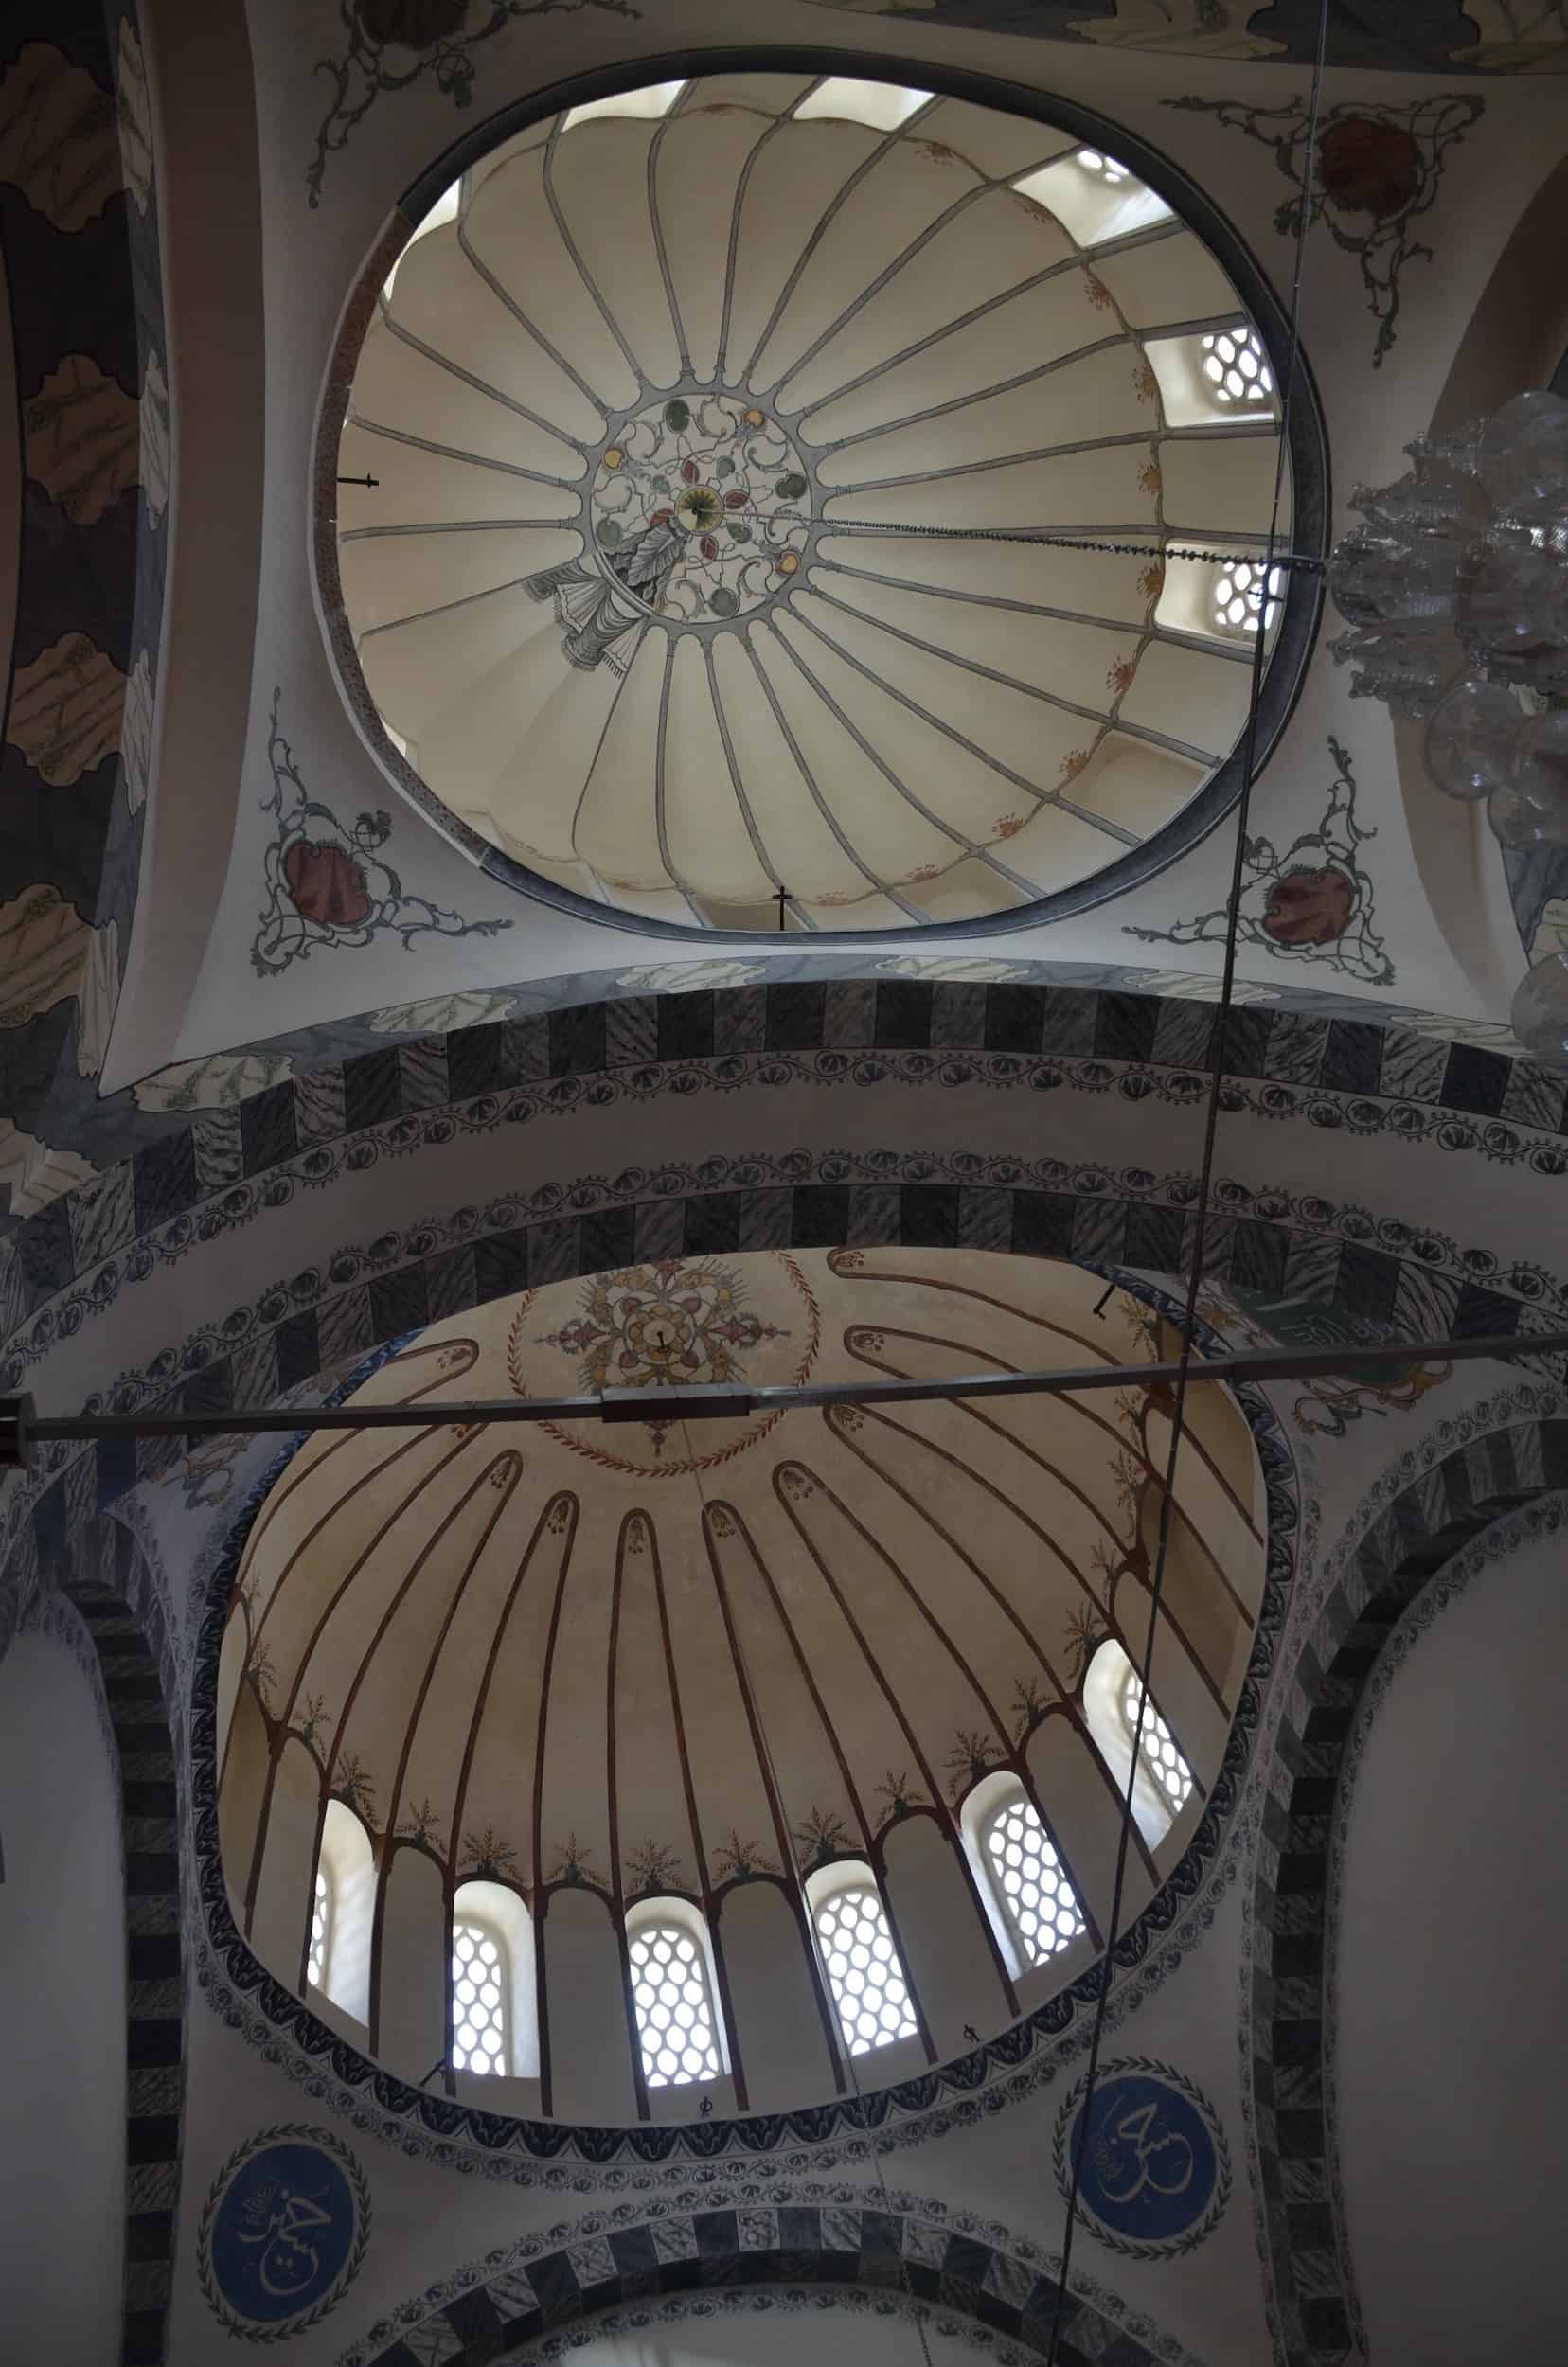 Domes of the Imperial Chapel of the Zeyrek Mosque in Zeyrek, Istanbul, Turkey